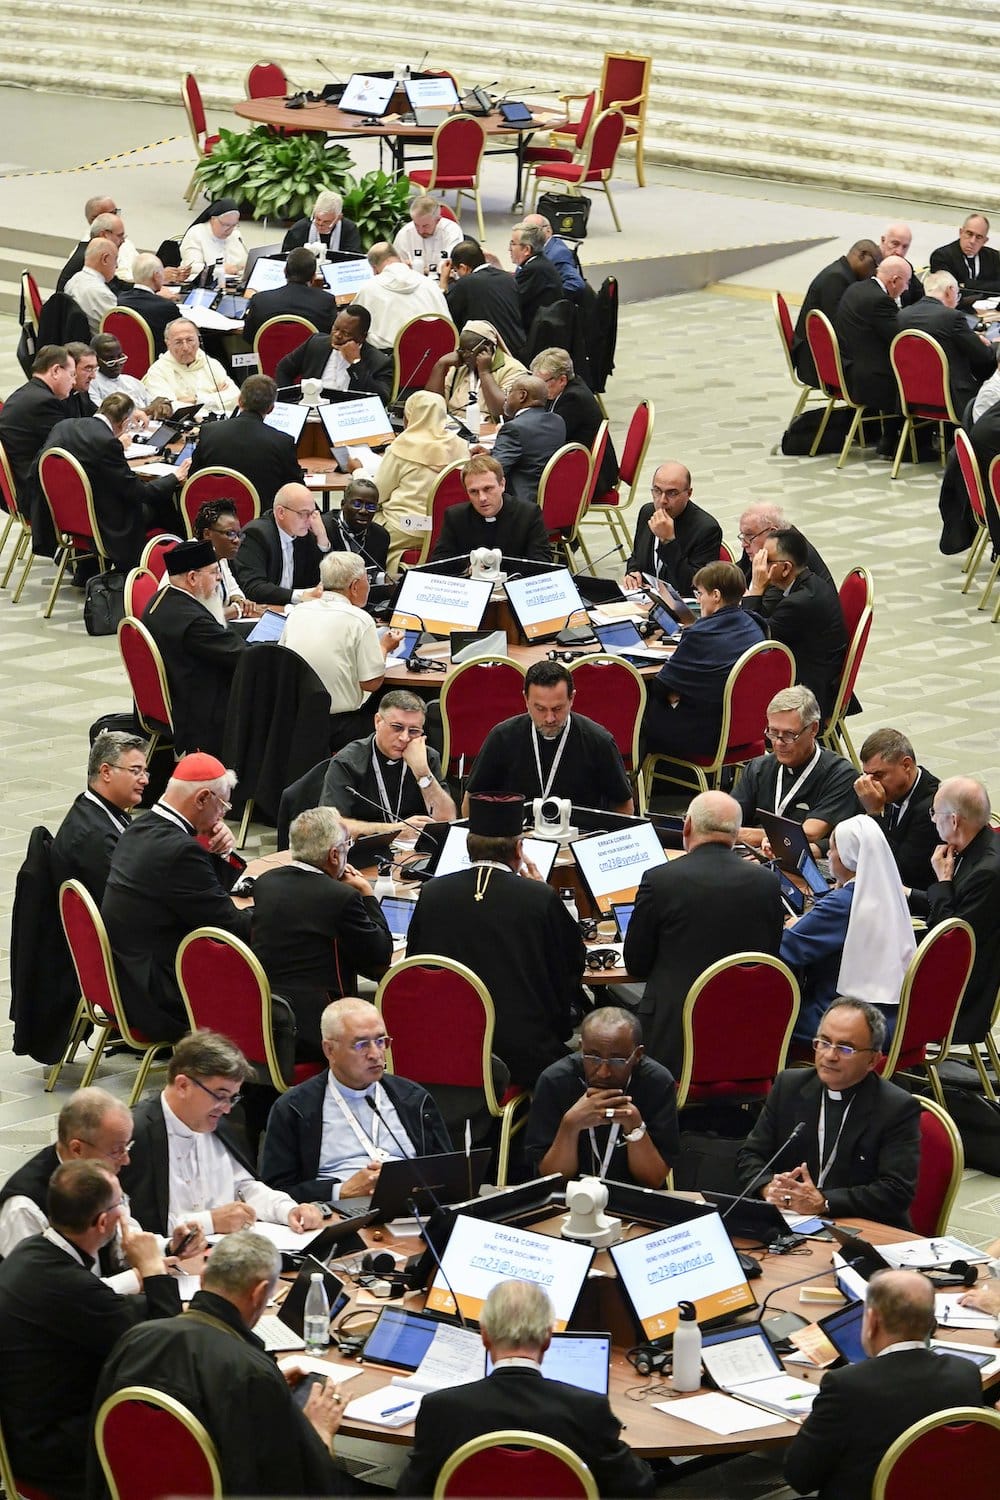 SYNOD SMALL GROUPS